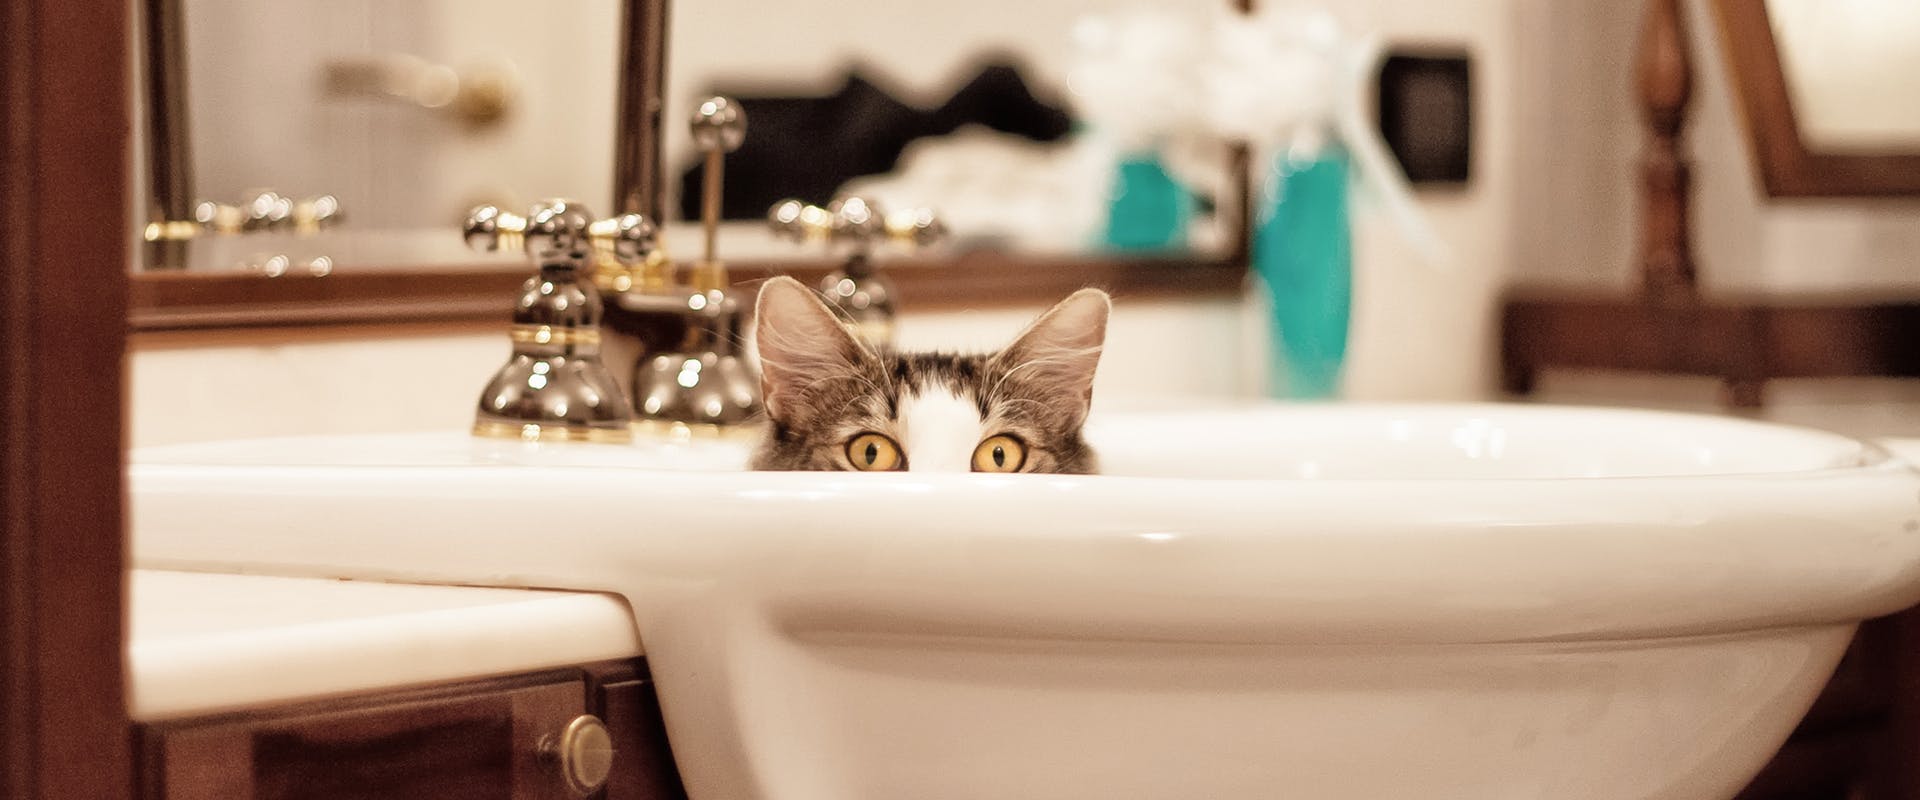 A cat sitting in a bathroom sink, peering out